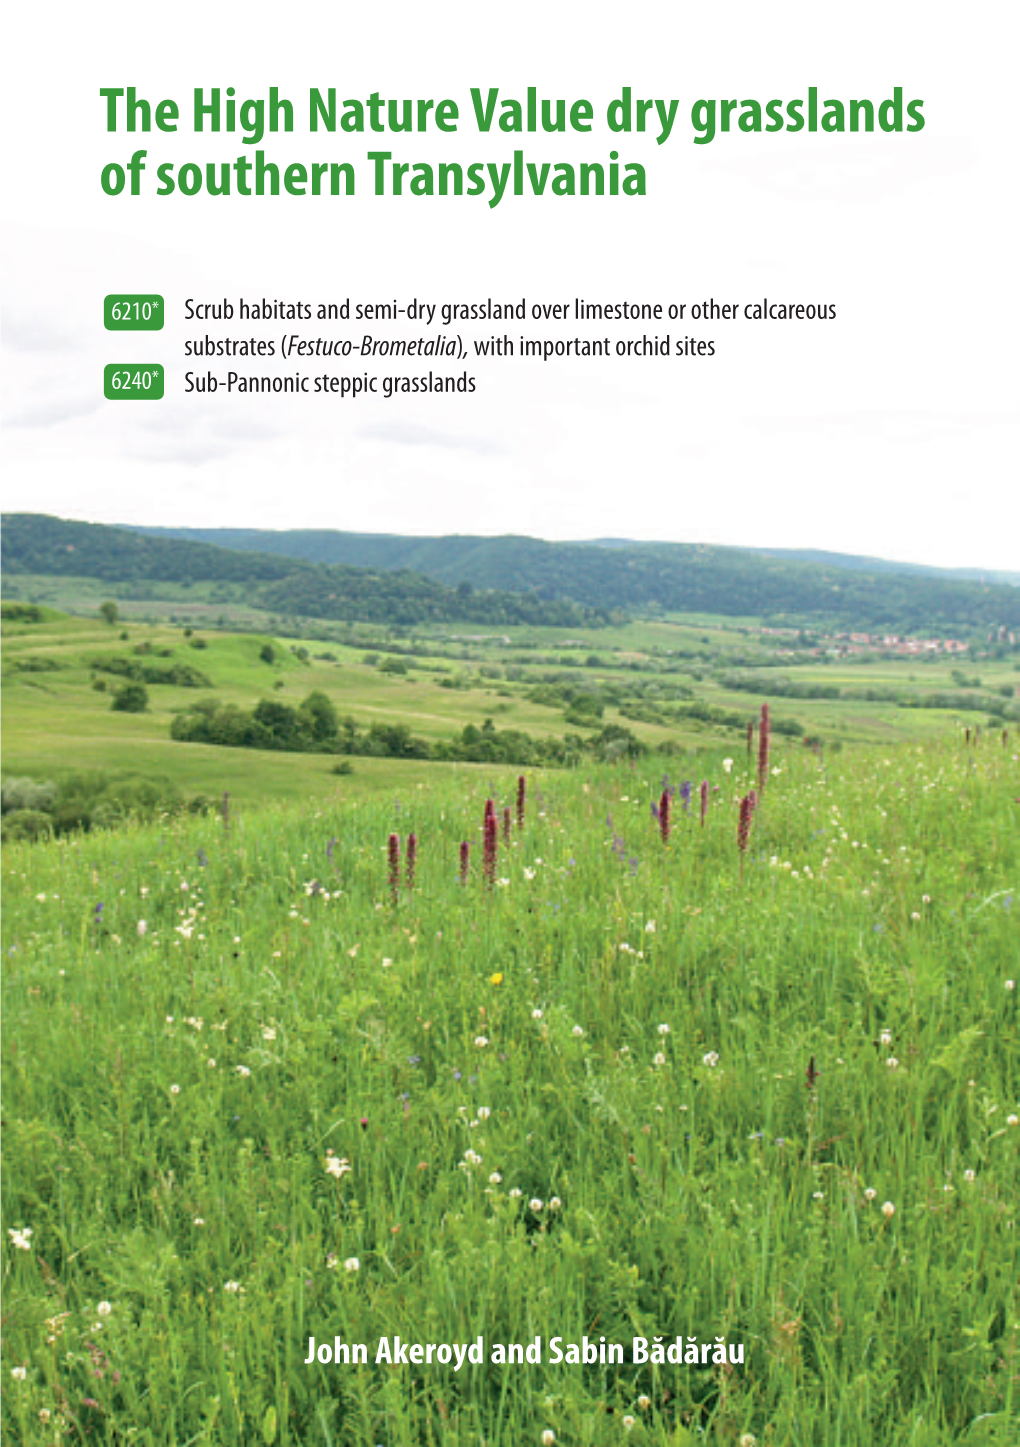 The High Nature Value Dry Grasslands of Southern Transylvania